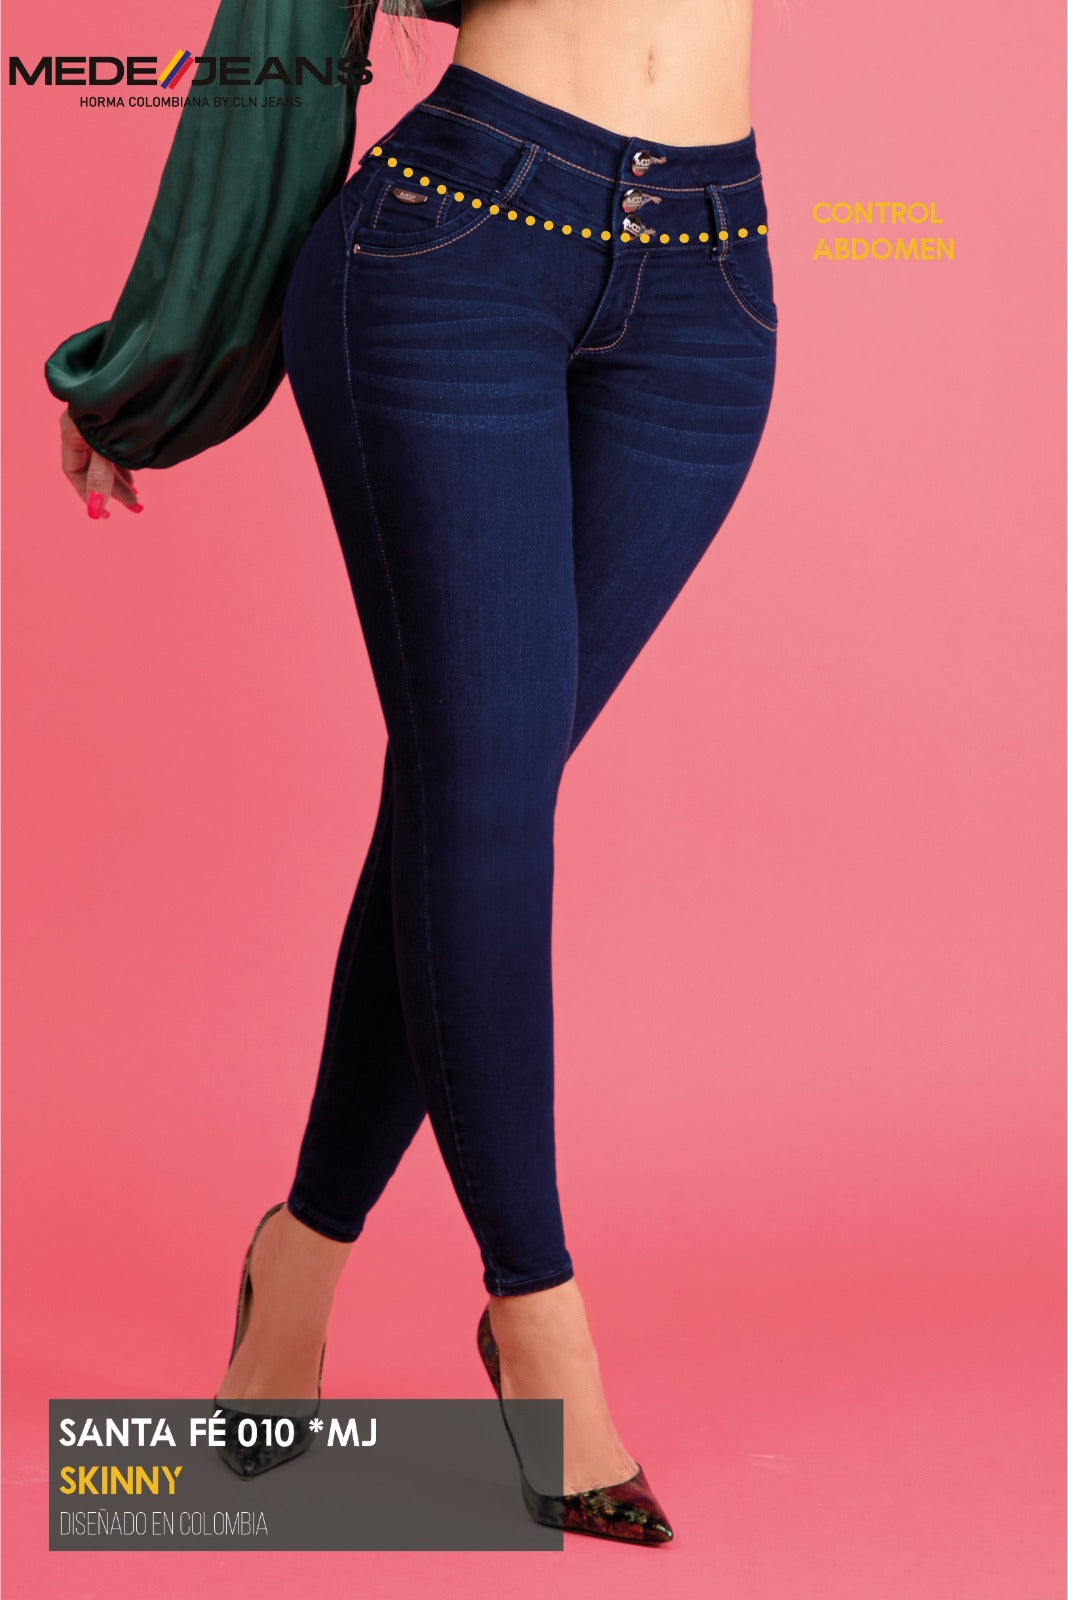 Mede jeans colombianos MD010